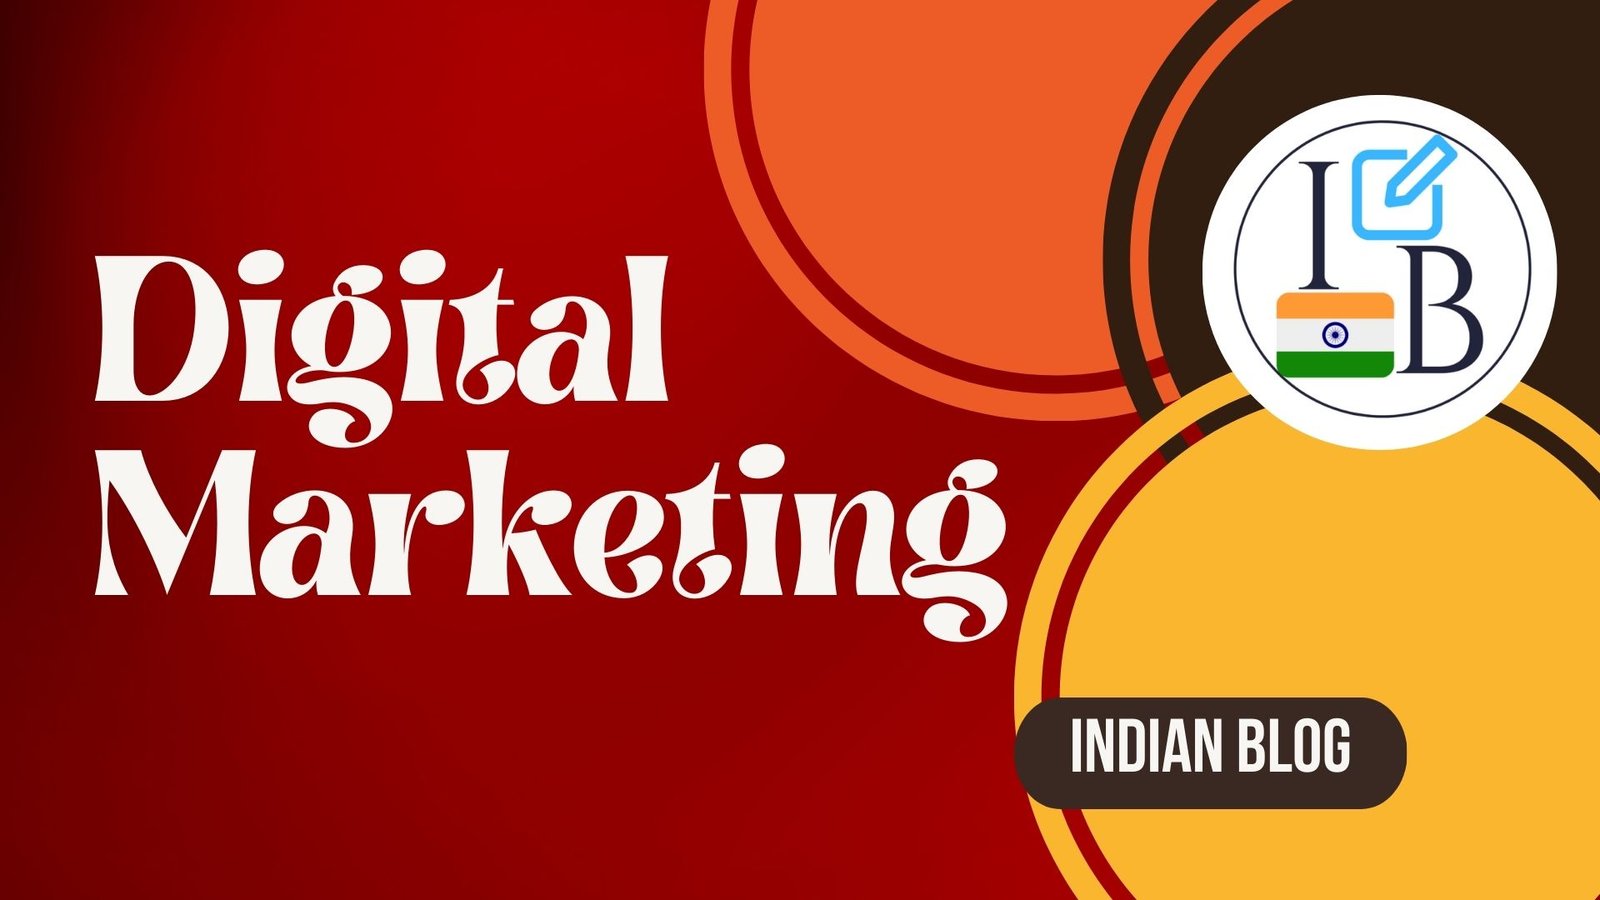 You are currently viewing Digital Marketing: Explained on Indian Blog